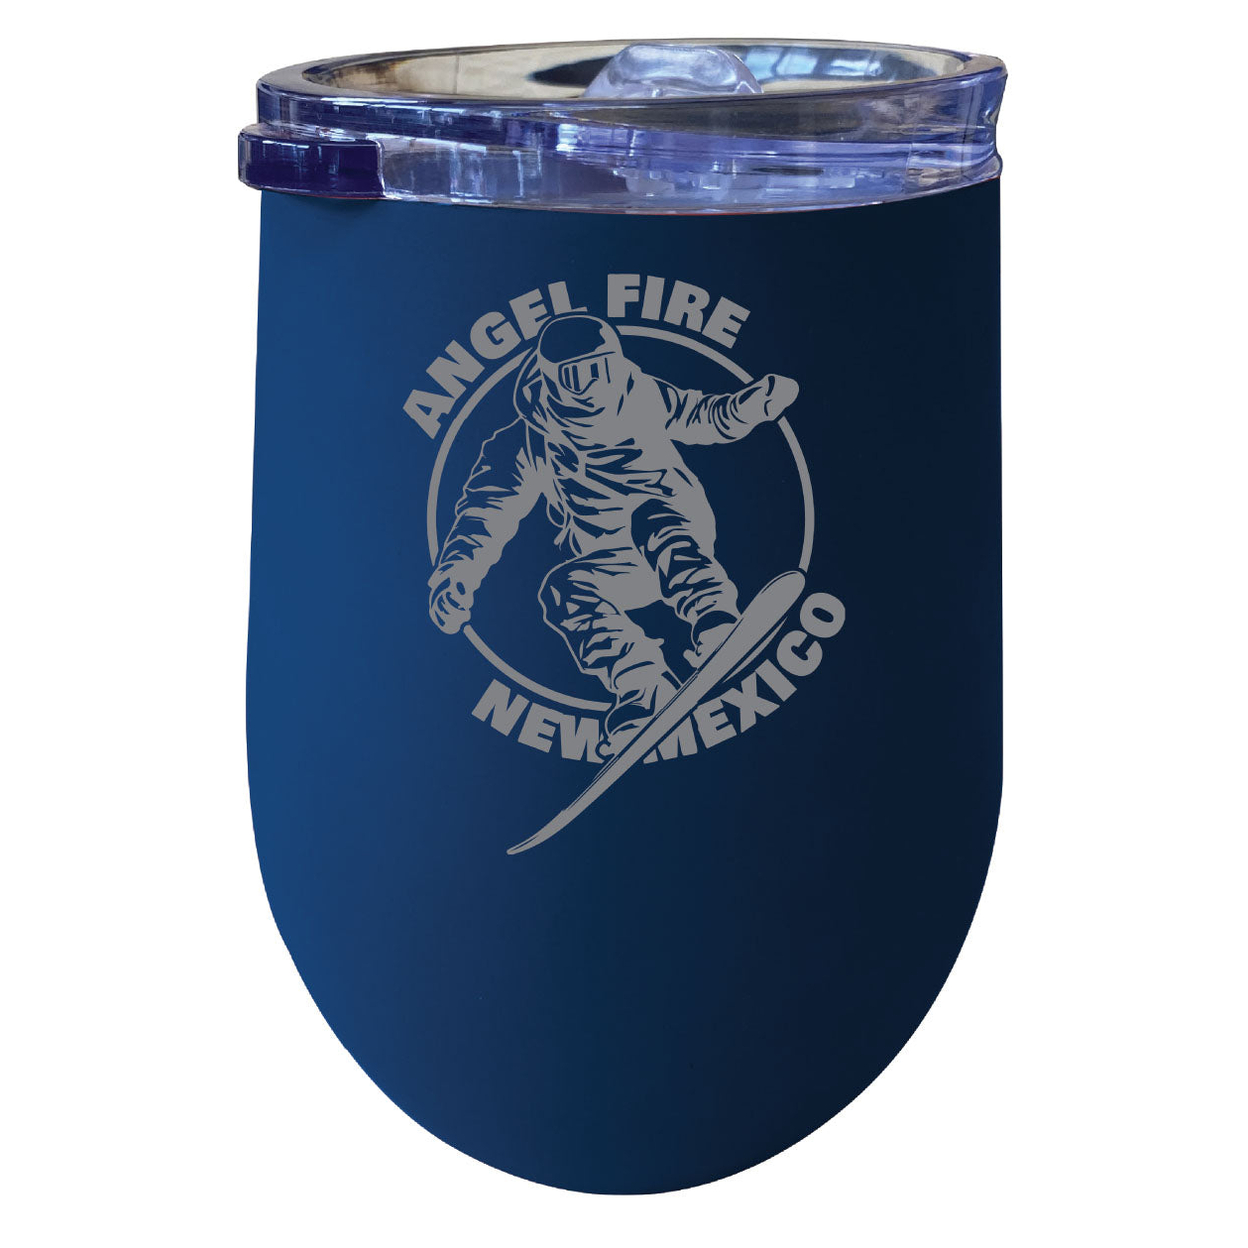 Angel Fire New Mexico Souvenir 12 Oz Engraved Insulated Wine Stainless Steel Tumbler - Navy,,2-Pack